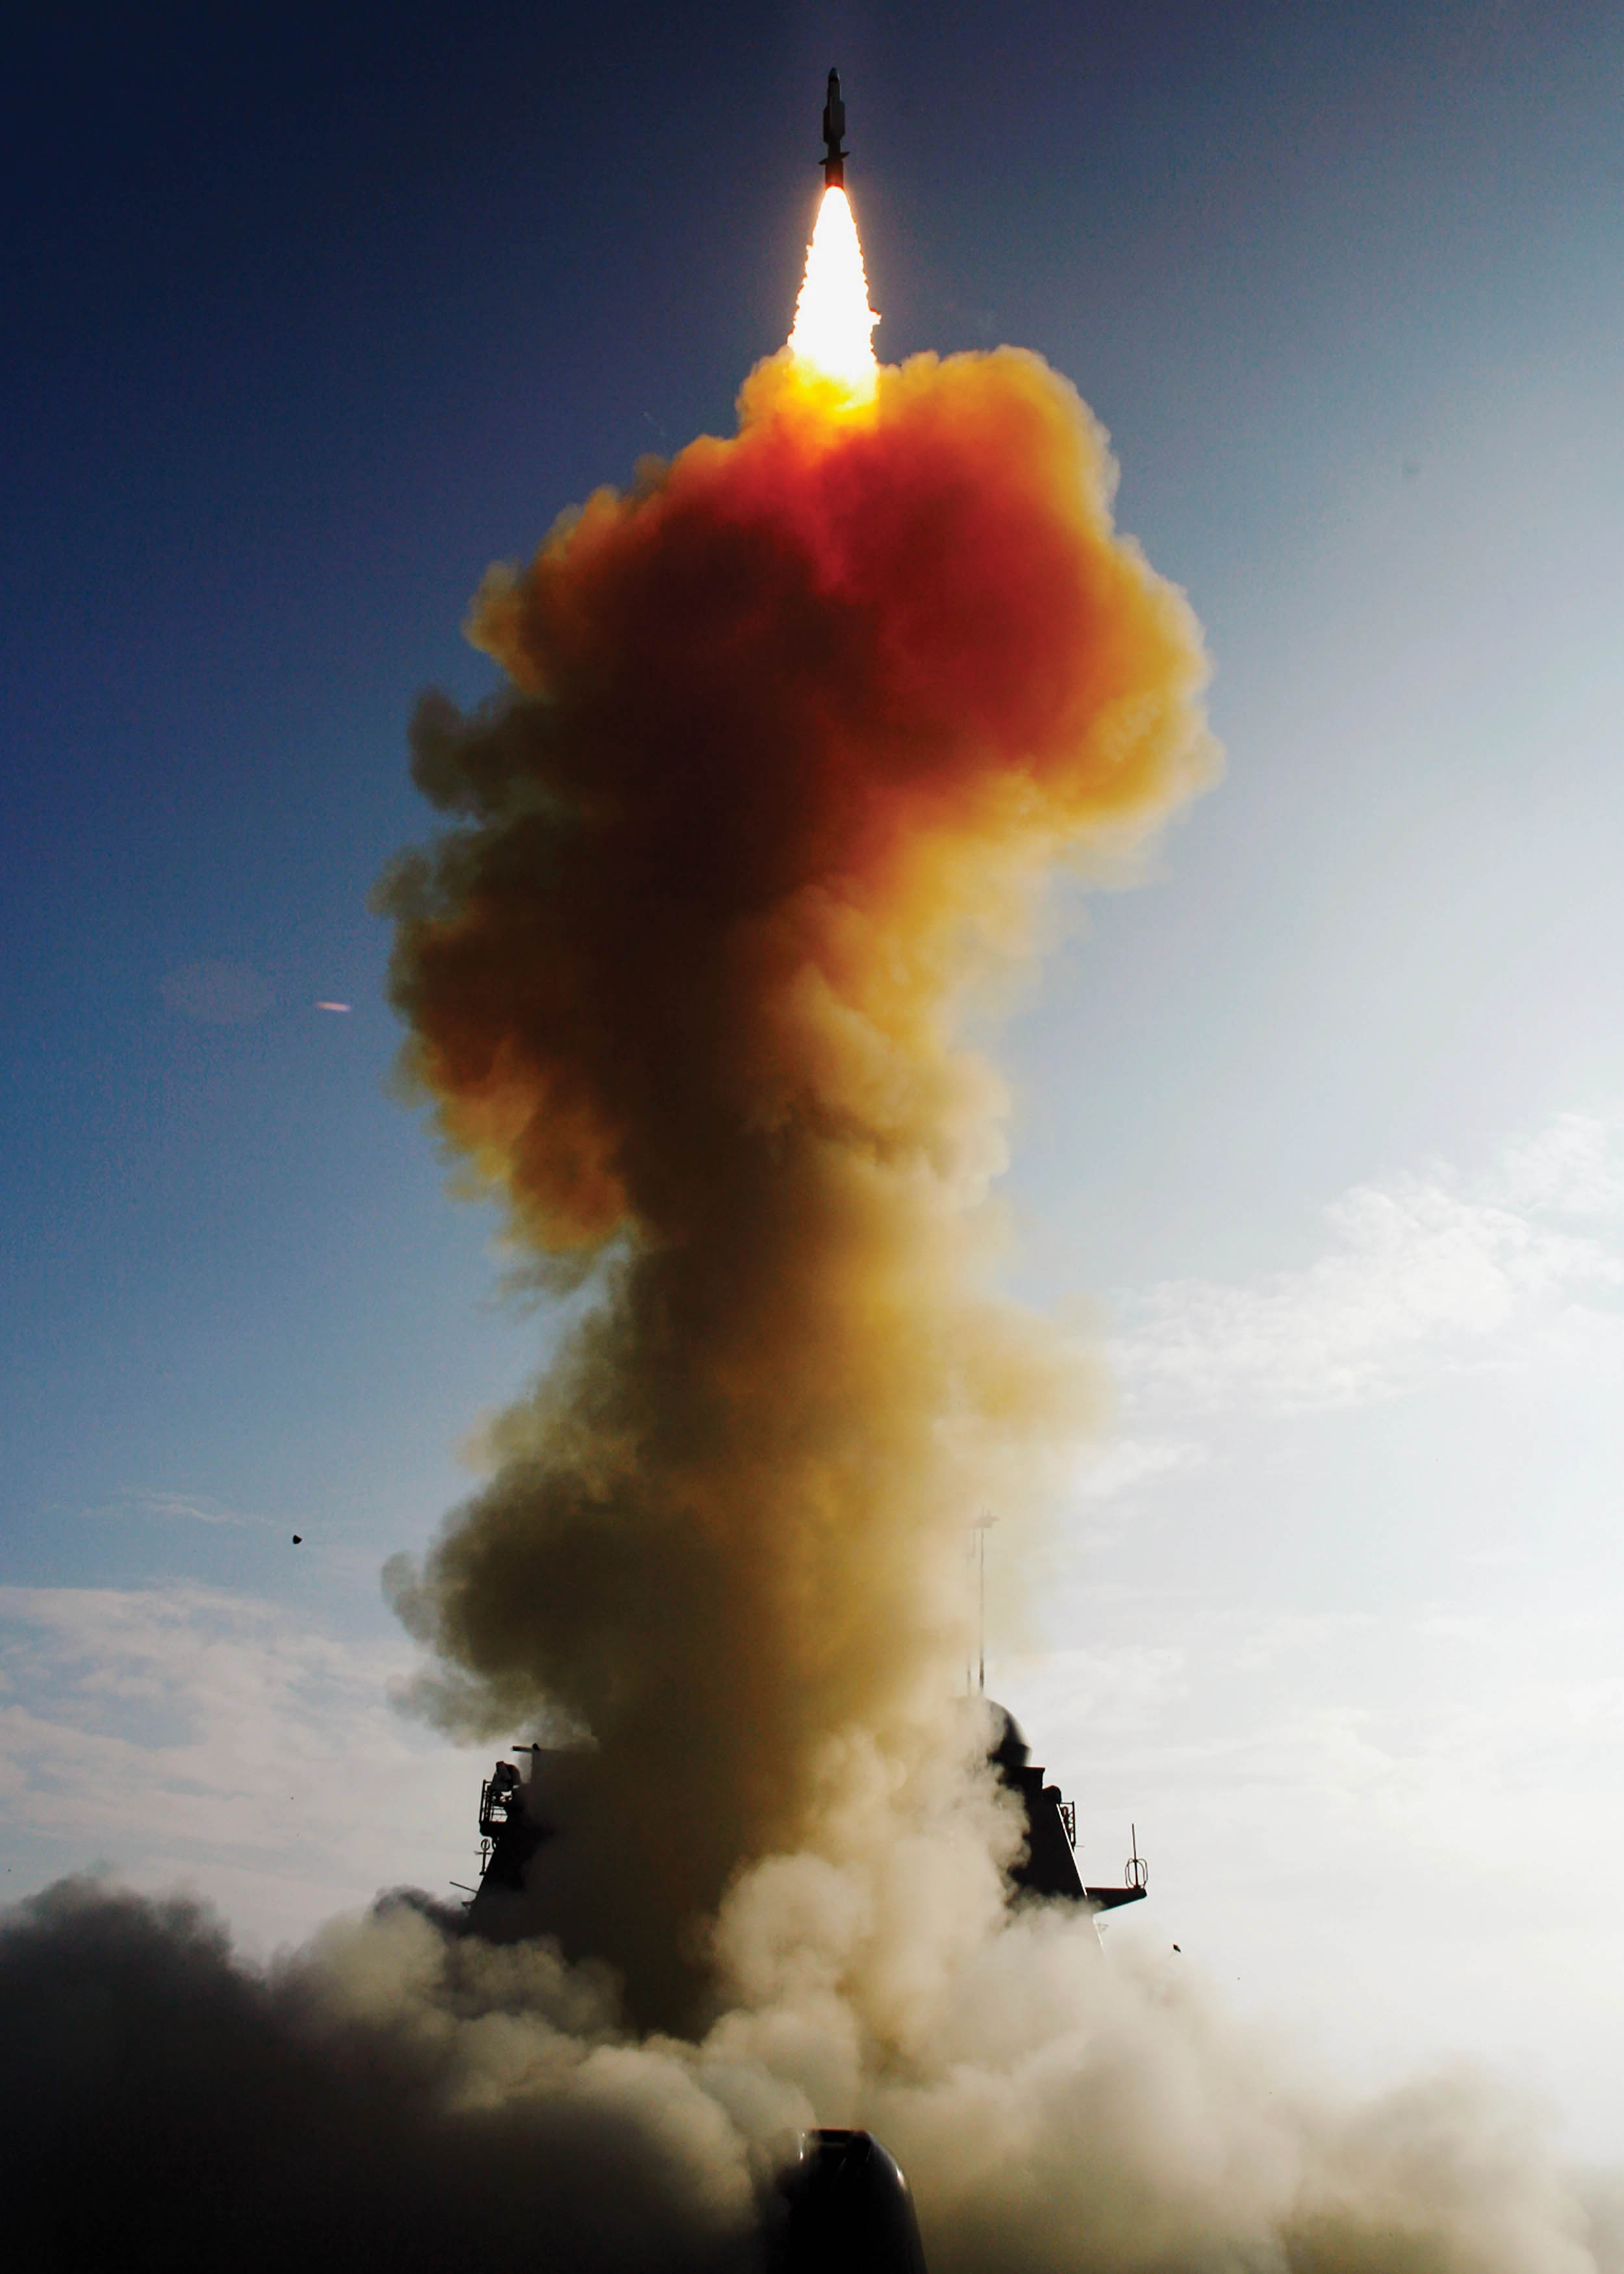 Single modified tactical Standard Missile–3 launches from USS Lake Erie, successfully impacting nonfunctioning National Reconnaissance Office satellite approximately 133 nautical miles over Pacific Ocean, February 20, 2008 (U.S. Navy)